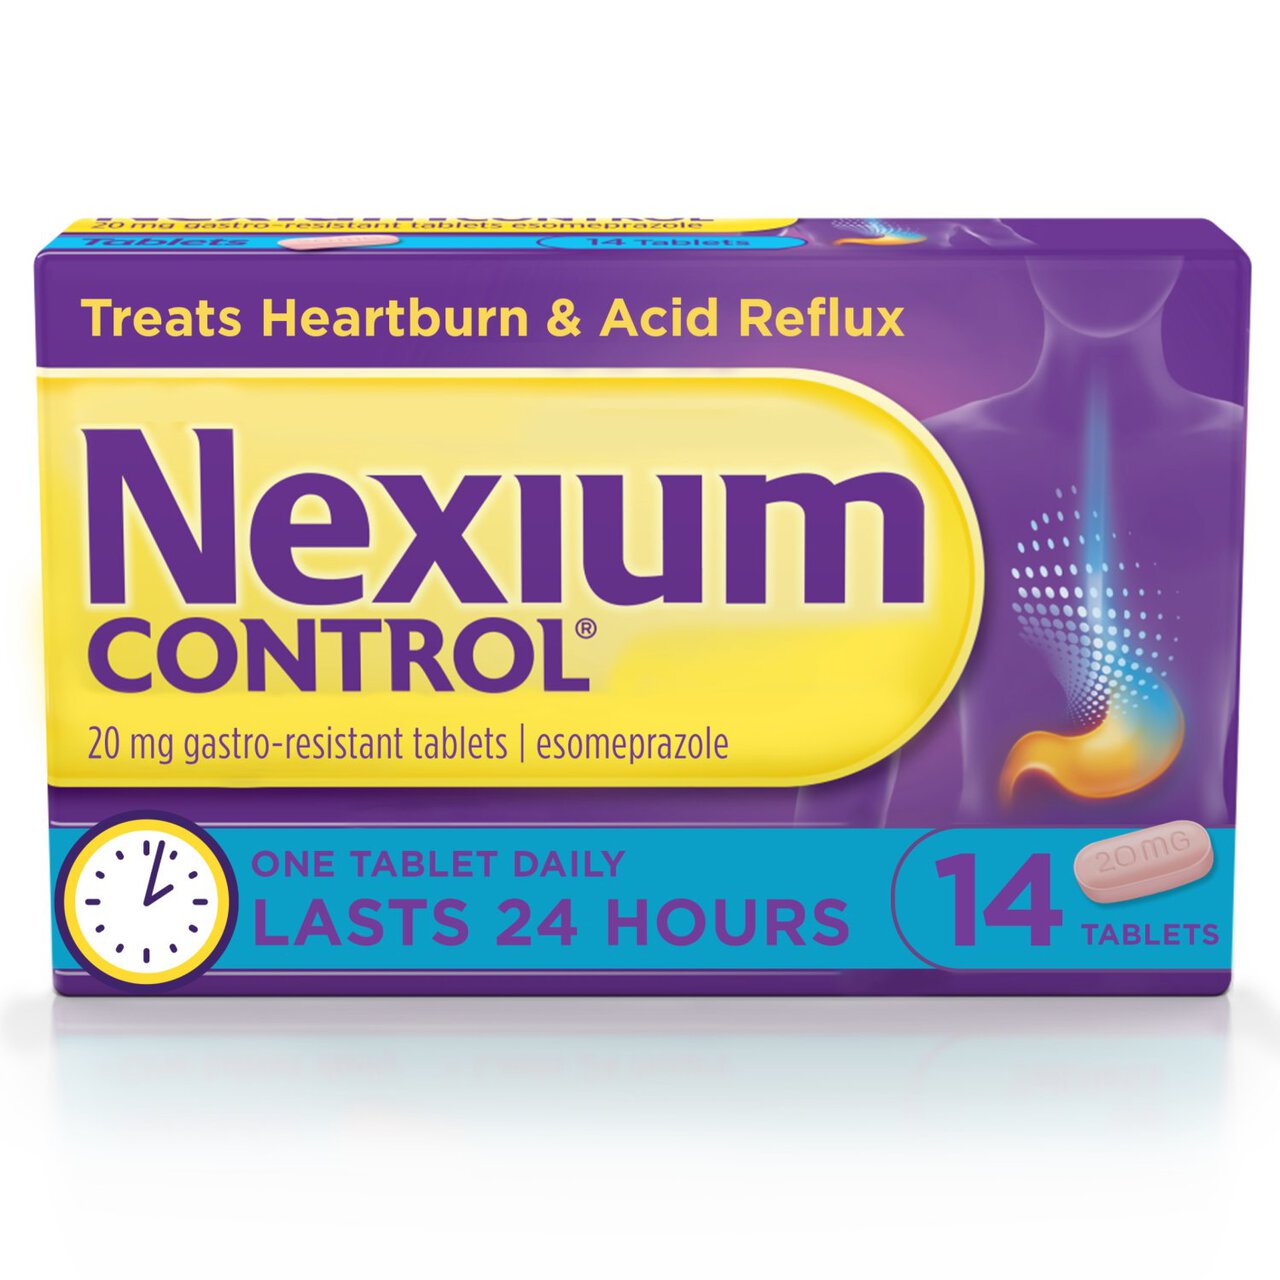 Nexium Control Heartburn & Indigestion 24 Hour Relief 20mg Tablets 14 per pack